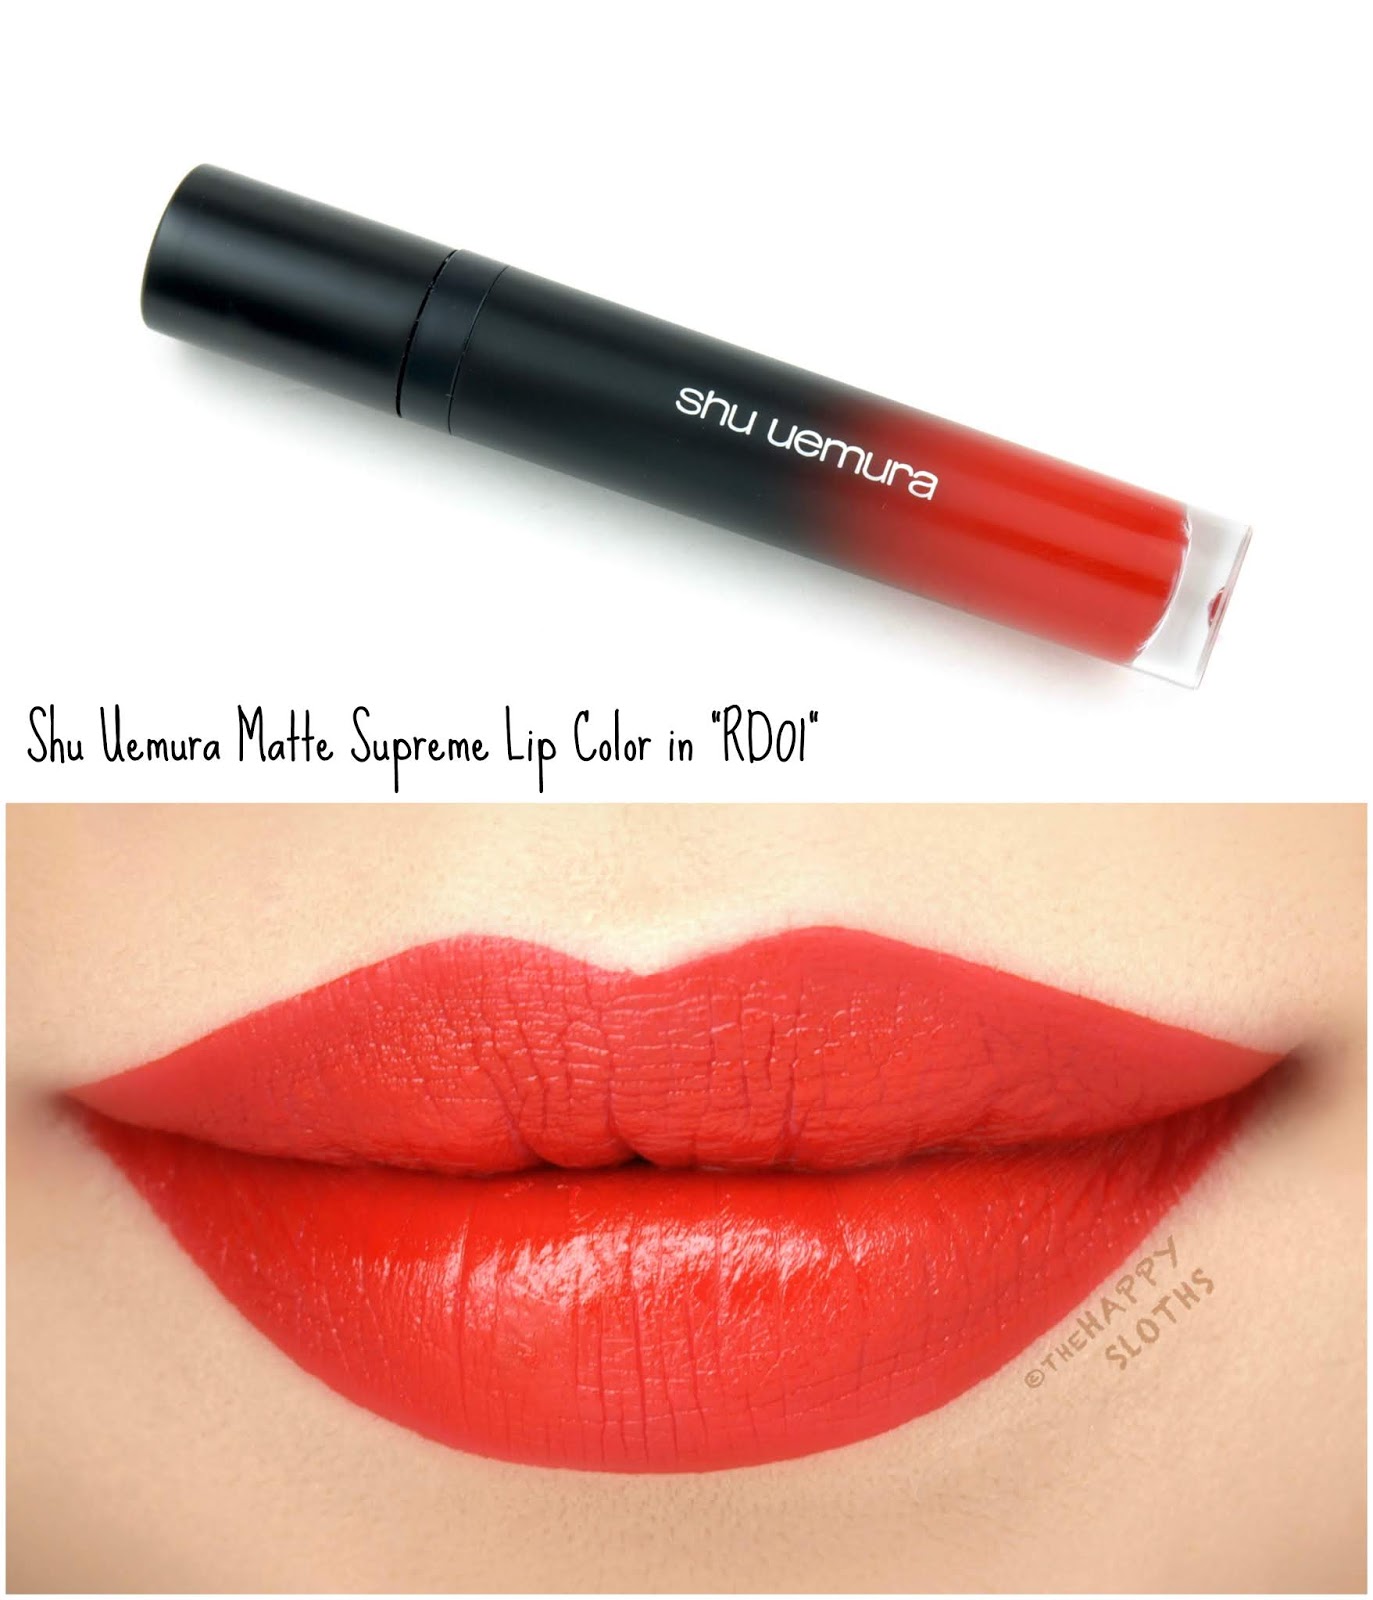 Shu Uemura | Matte Supreme Lip Color in "RD 01": Review and Swatches